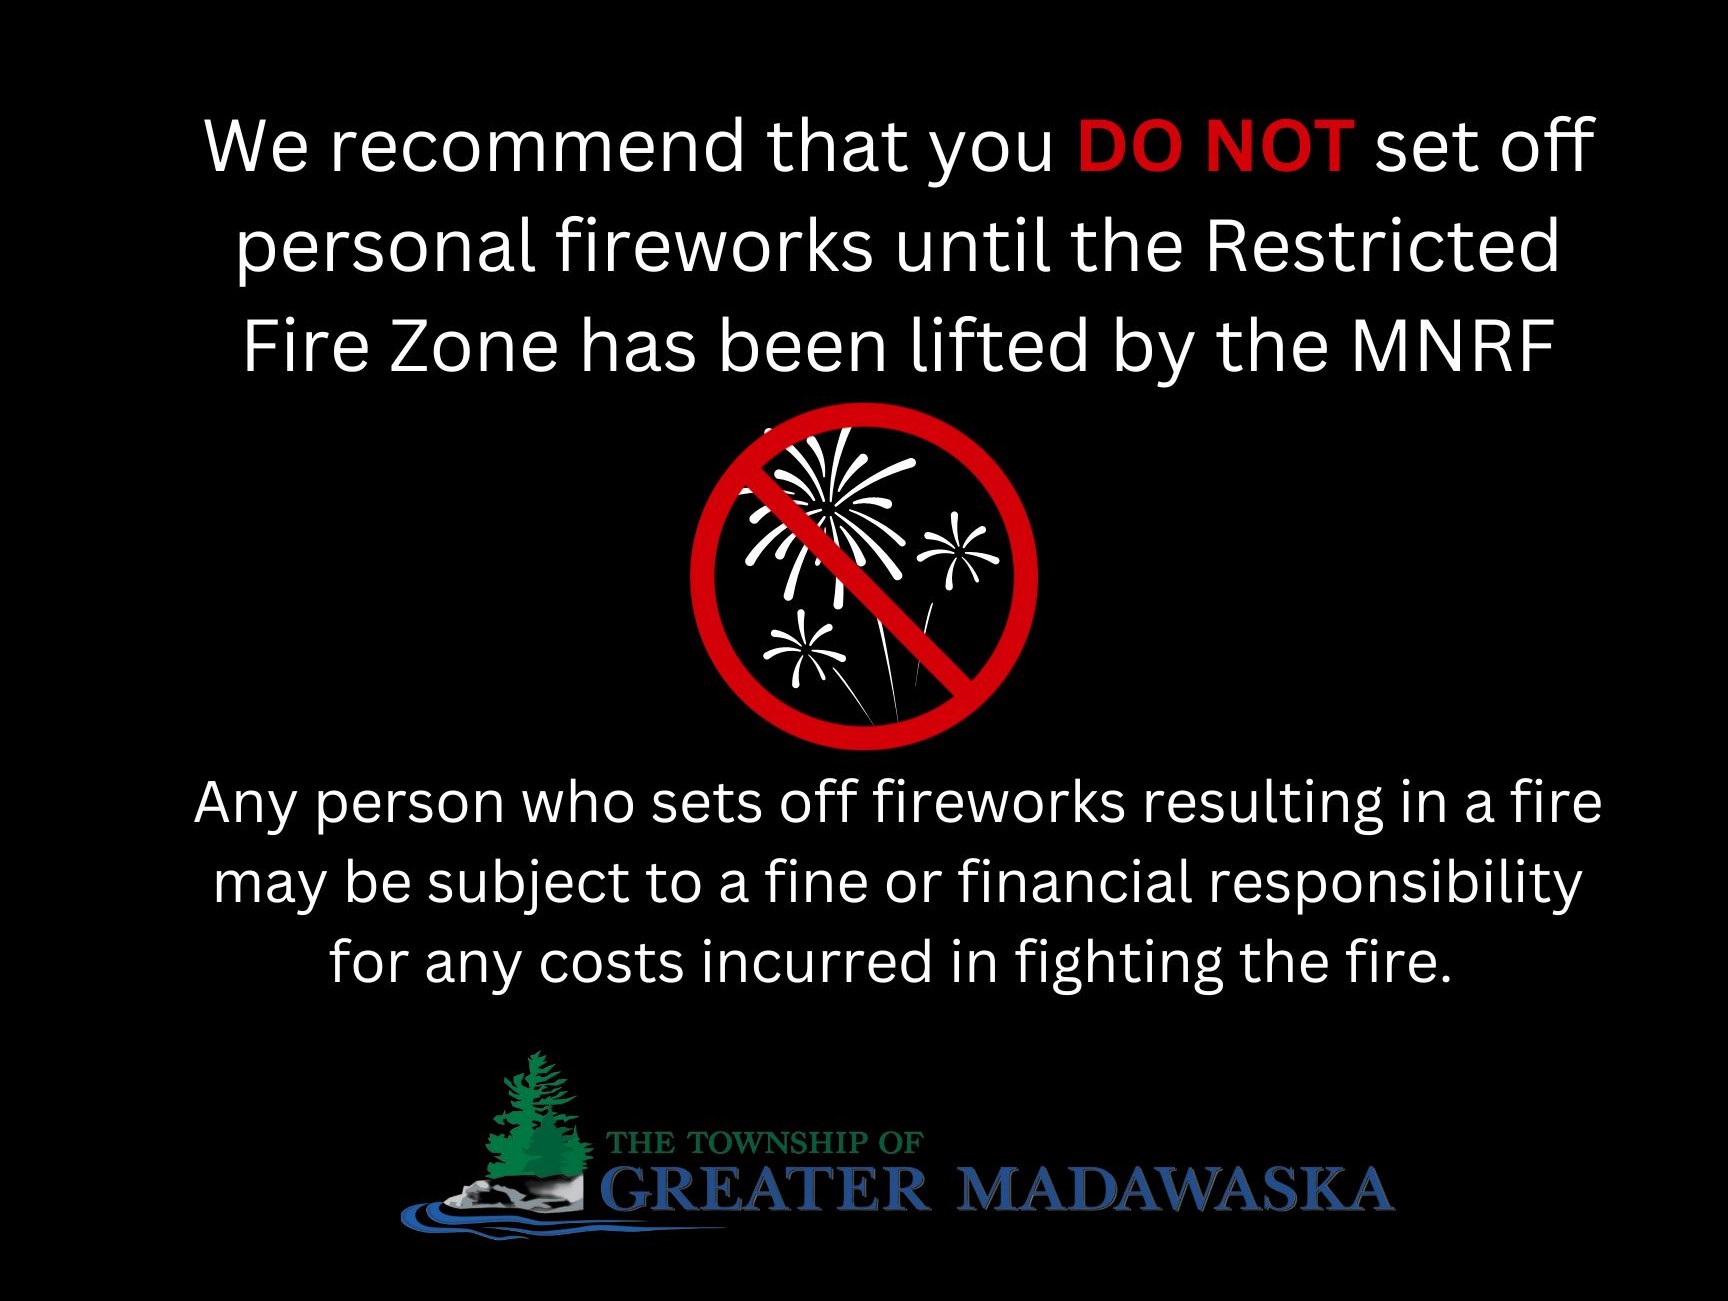 we recommend you do not use fireworks